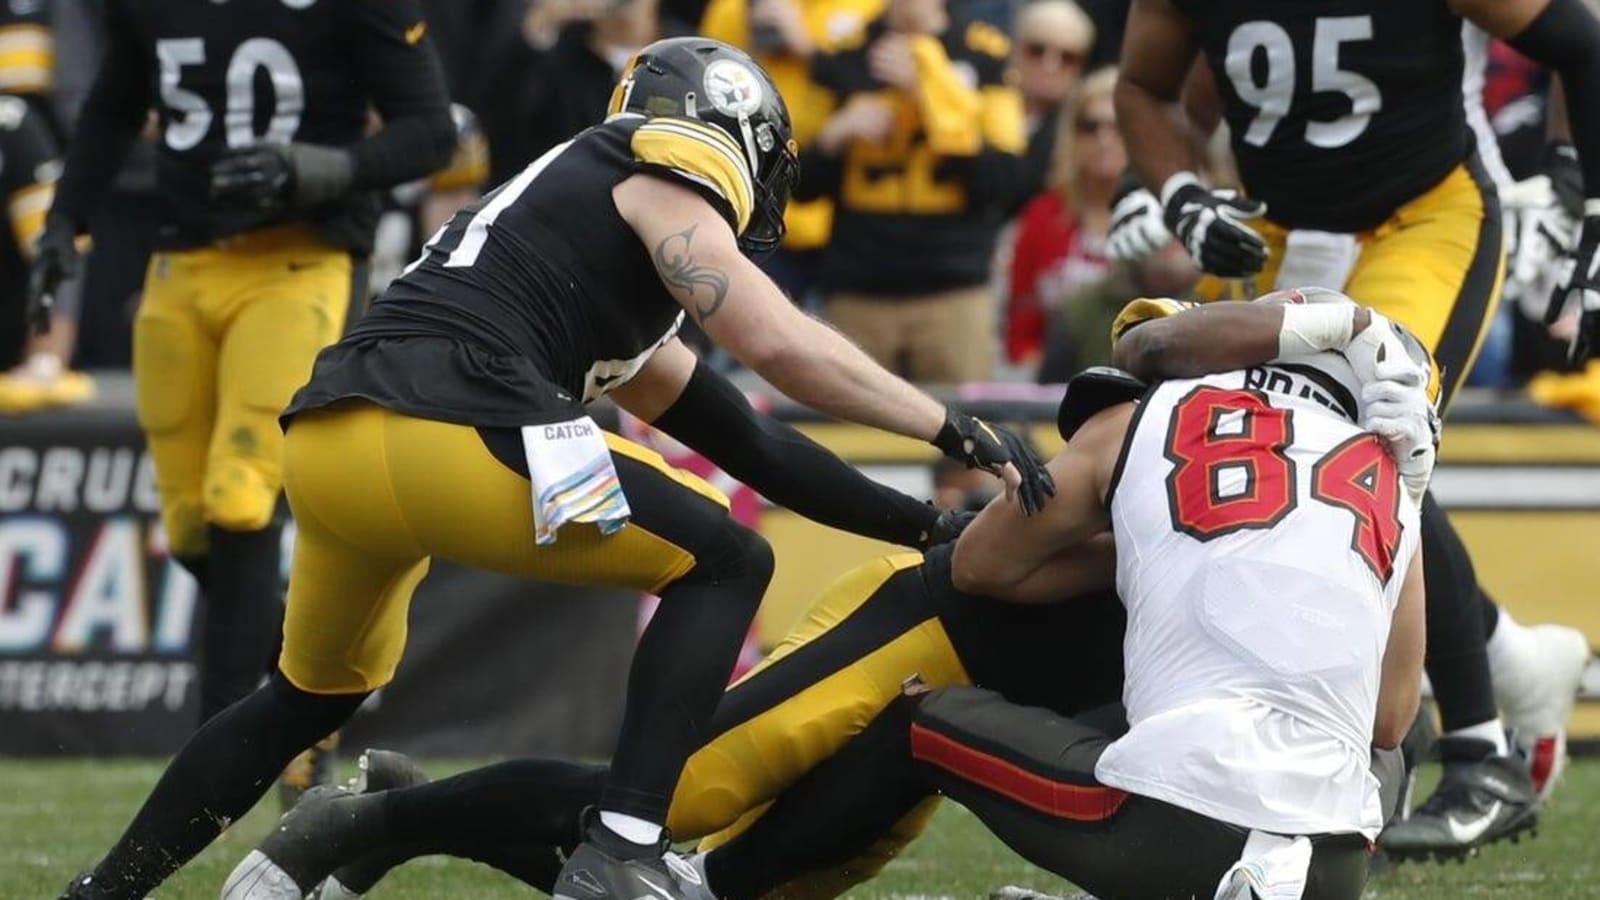 Bucs TE Cameron Brate in hospital, can move extremities after big hit